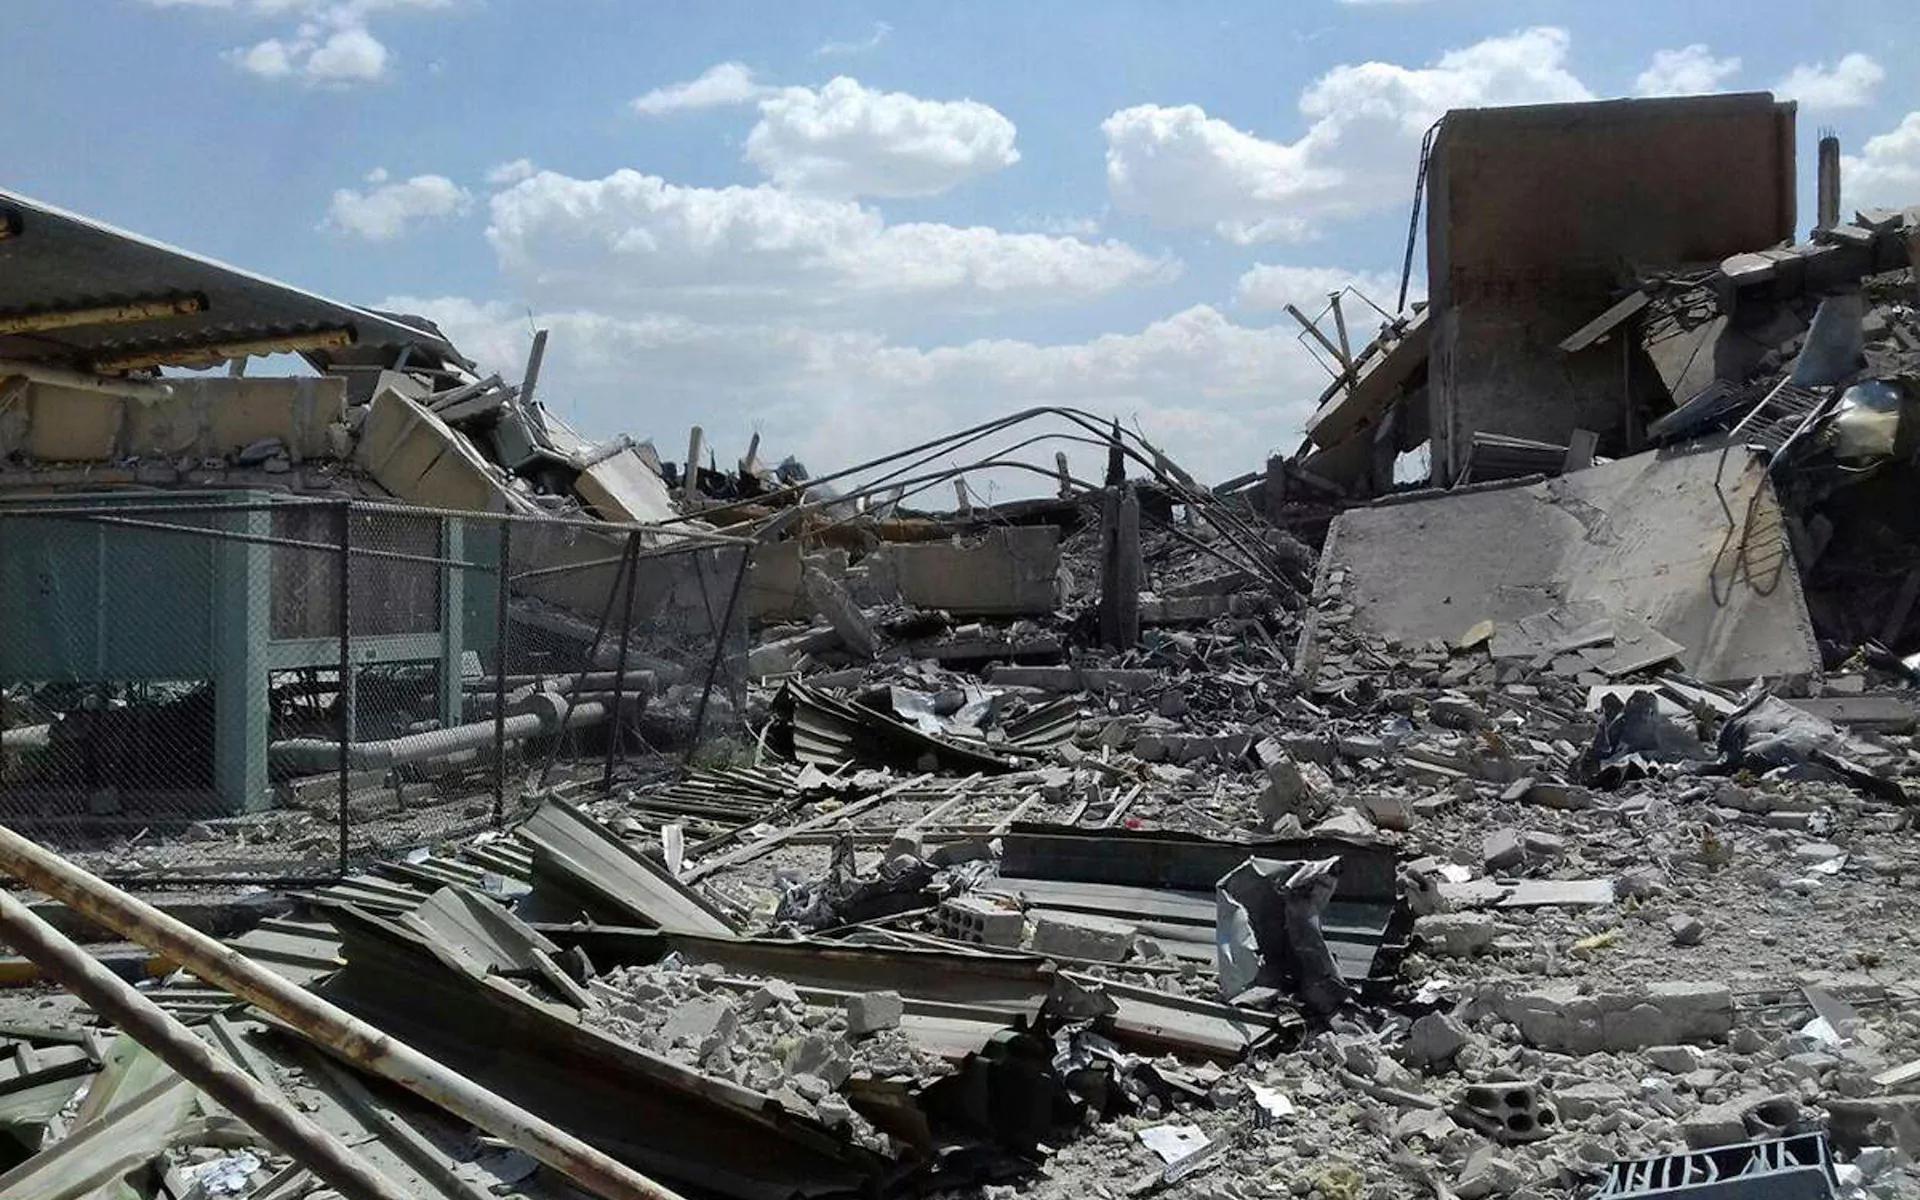 Damage to the Syrian Scientific Research Center in Barzeh, near Damascus